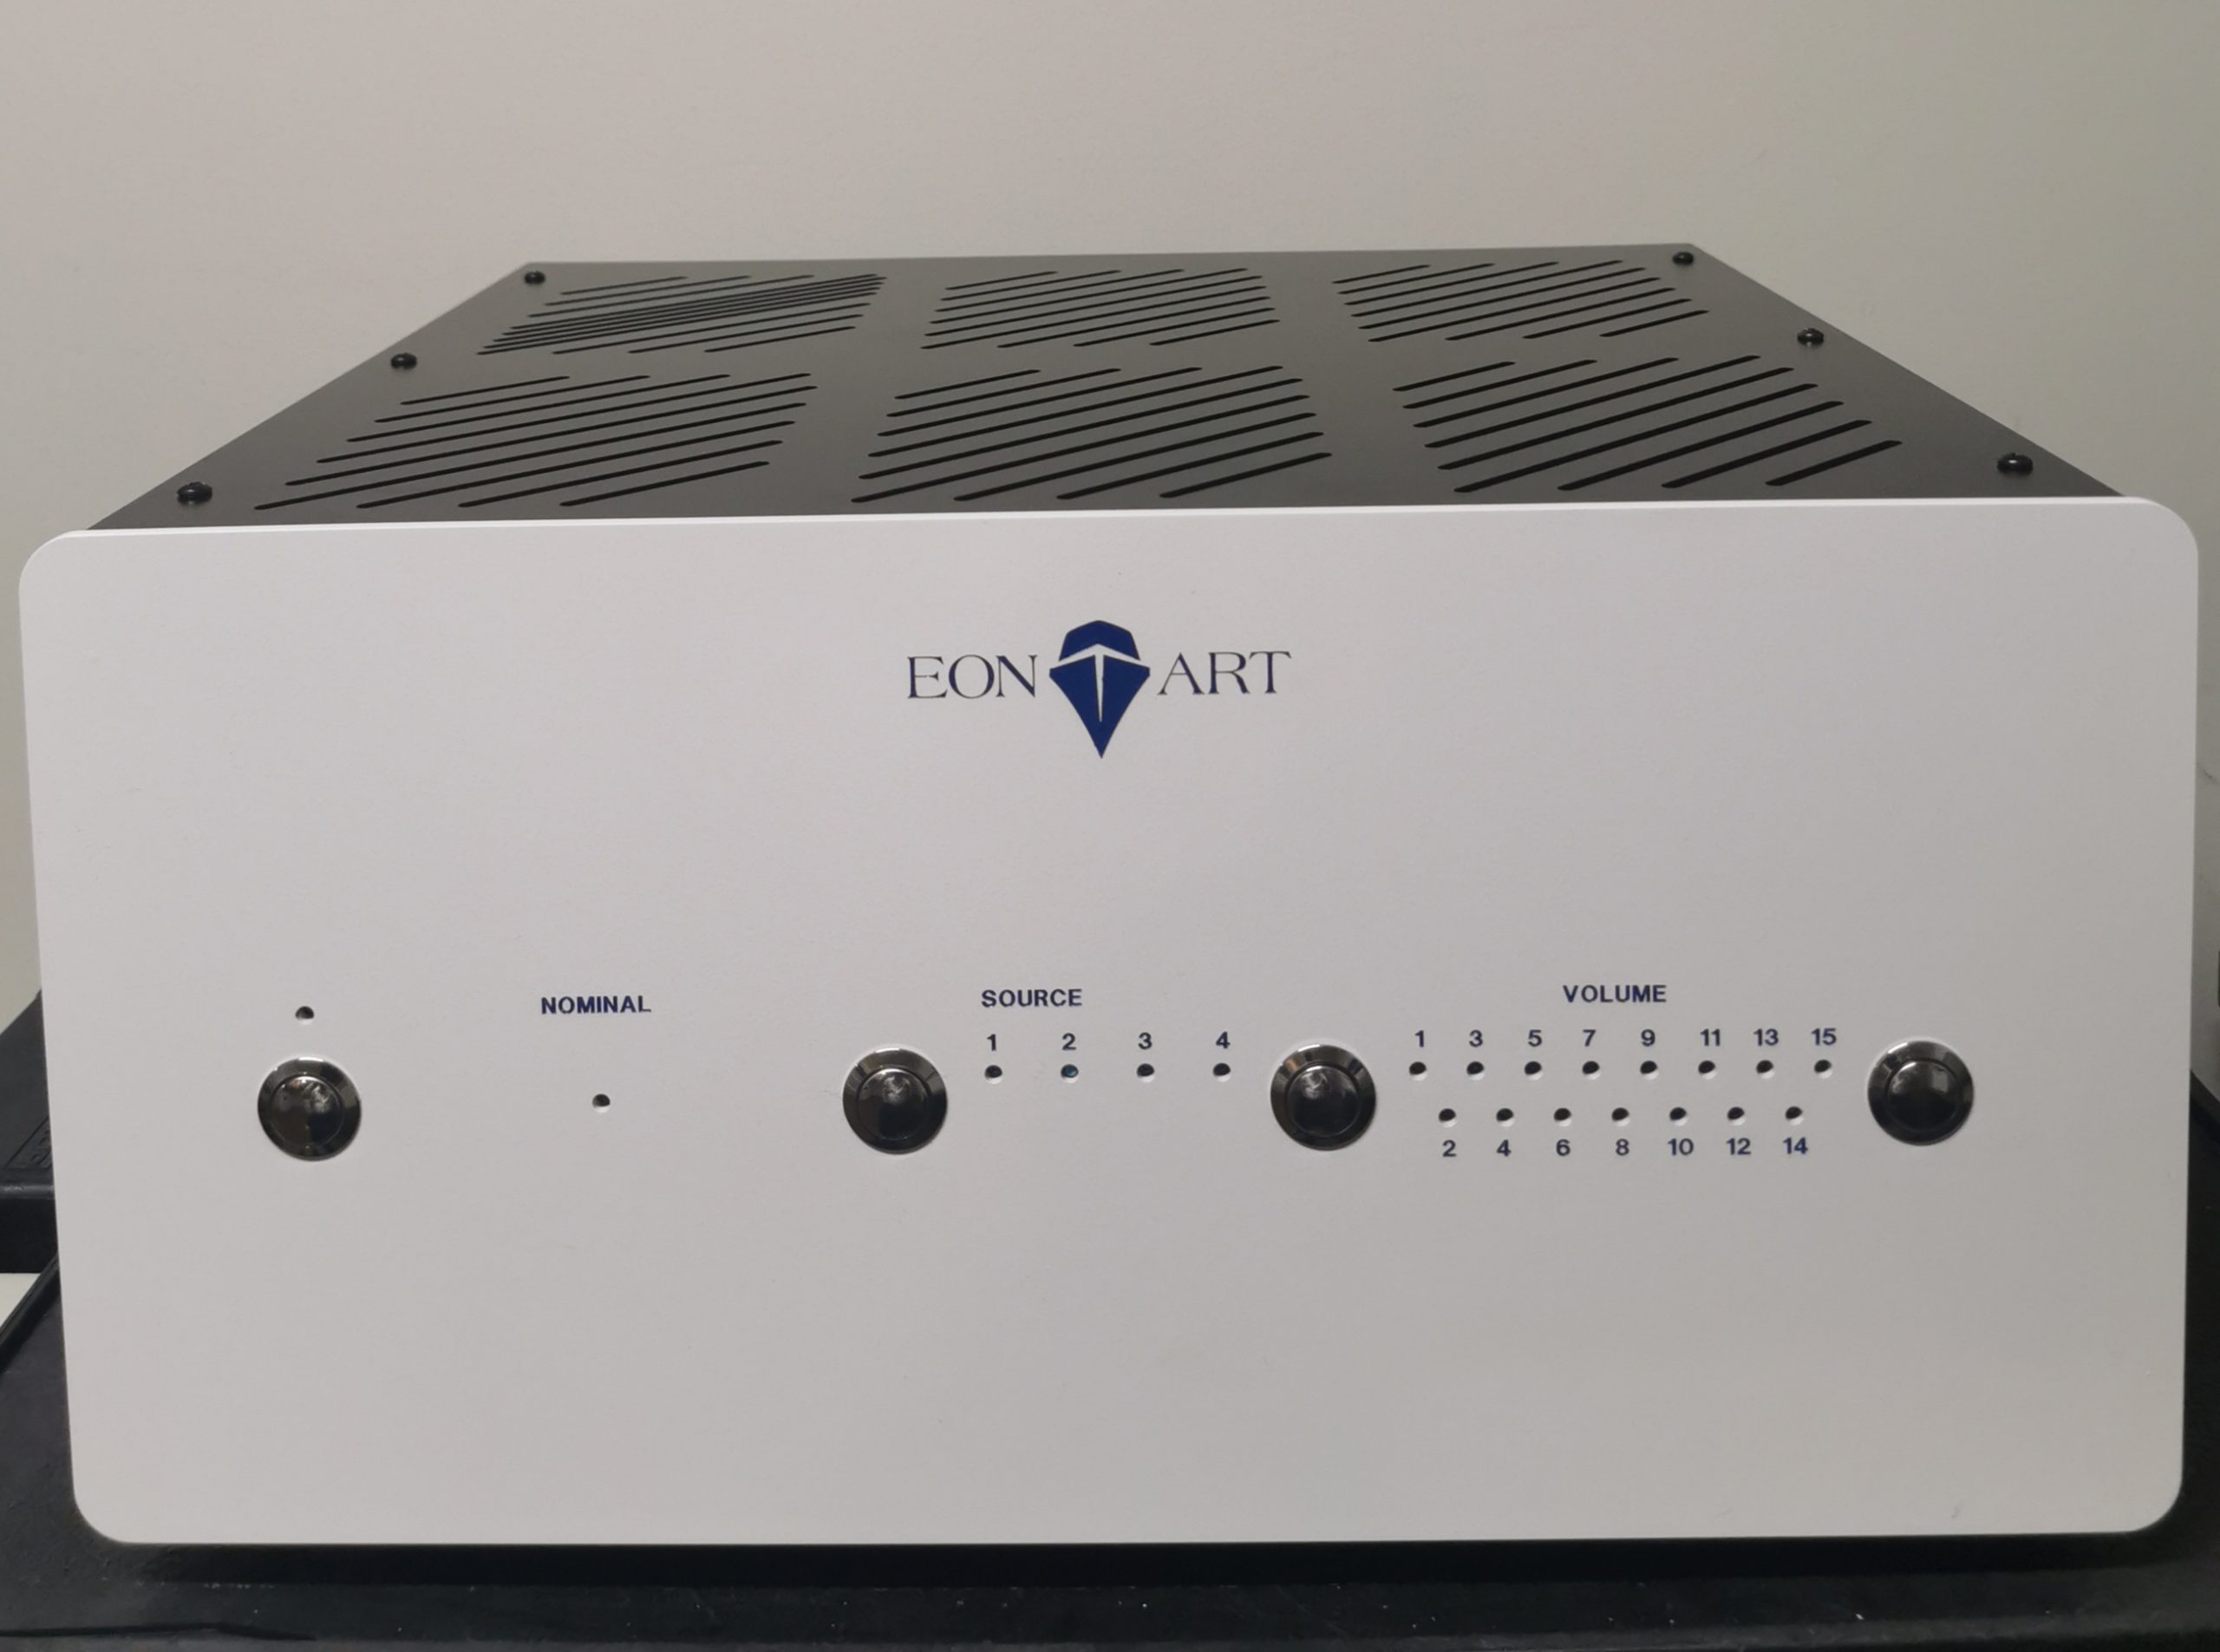 Eon Art launches the Squark SE Integrated amplifier